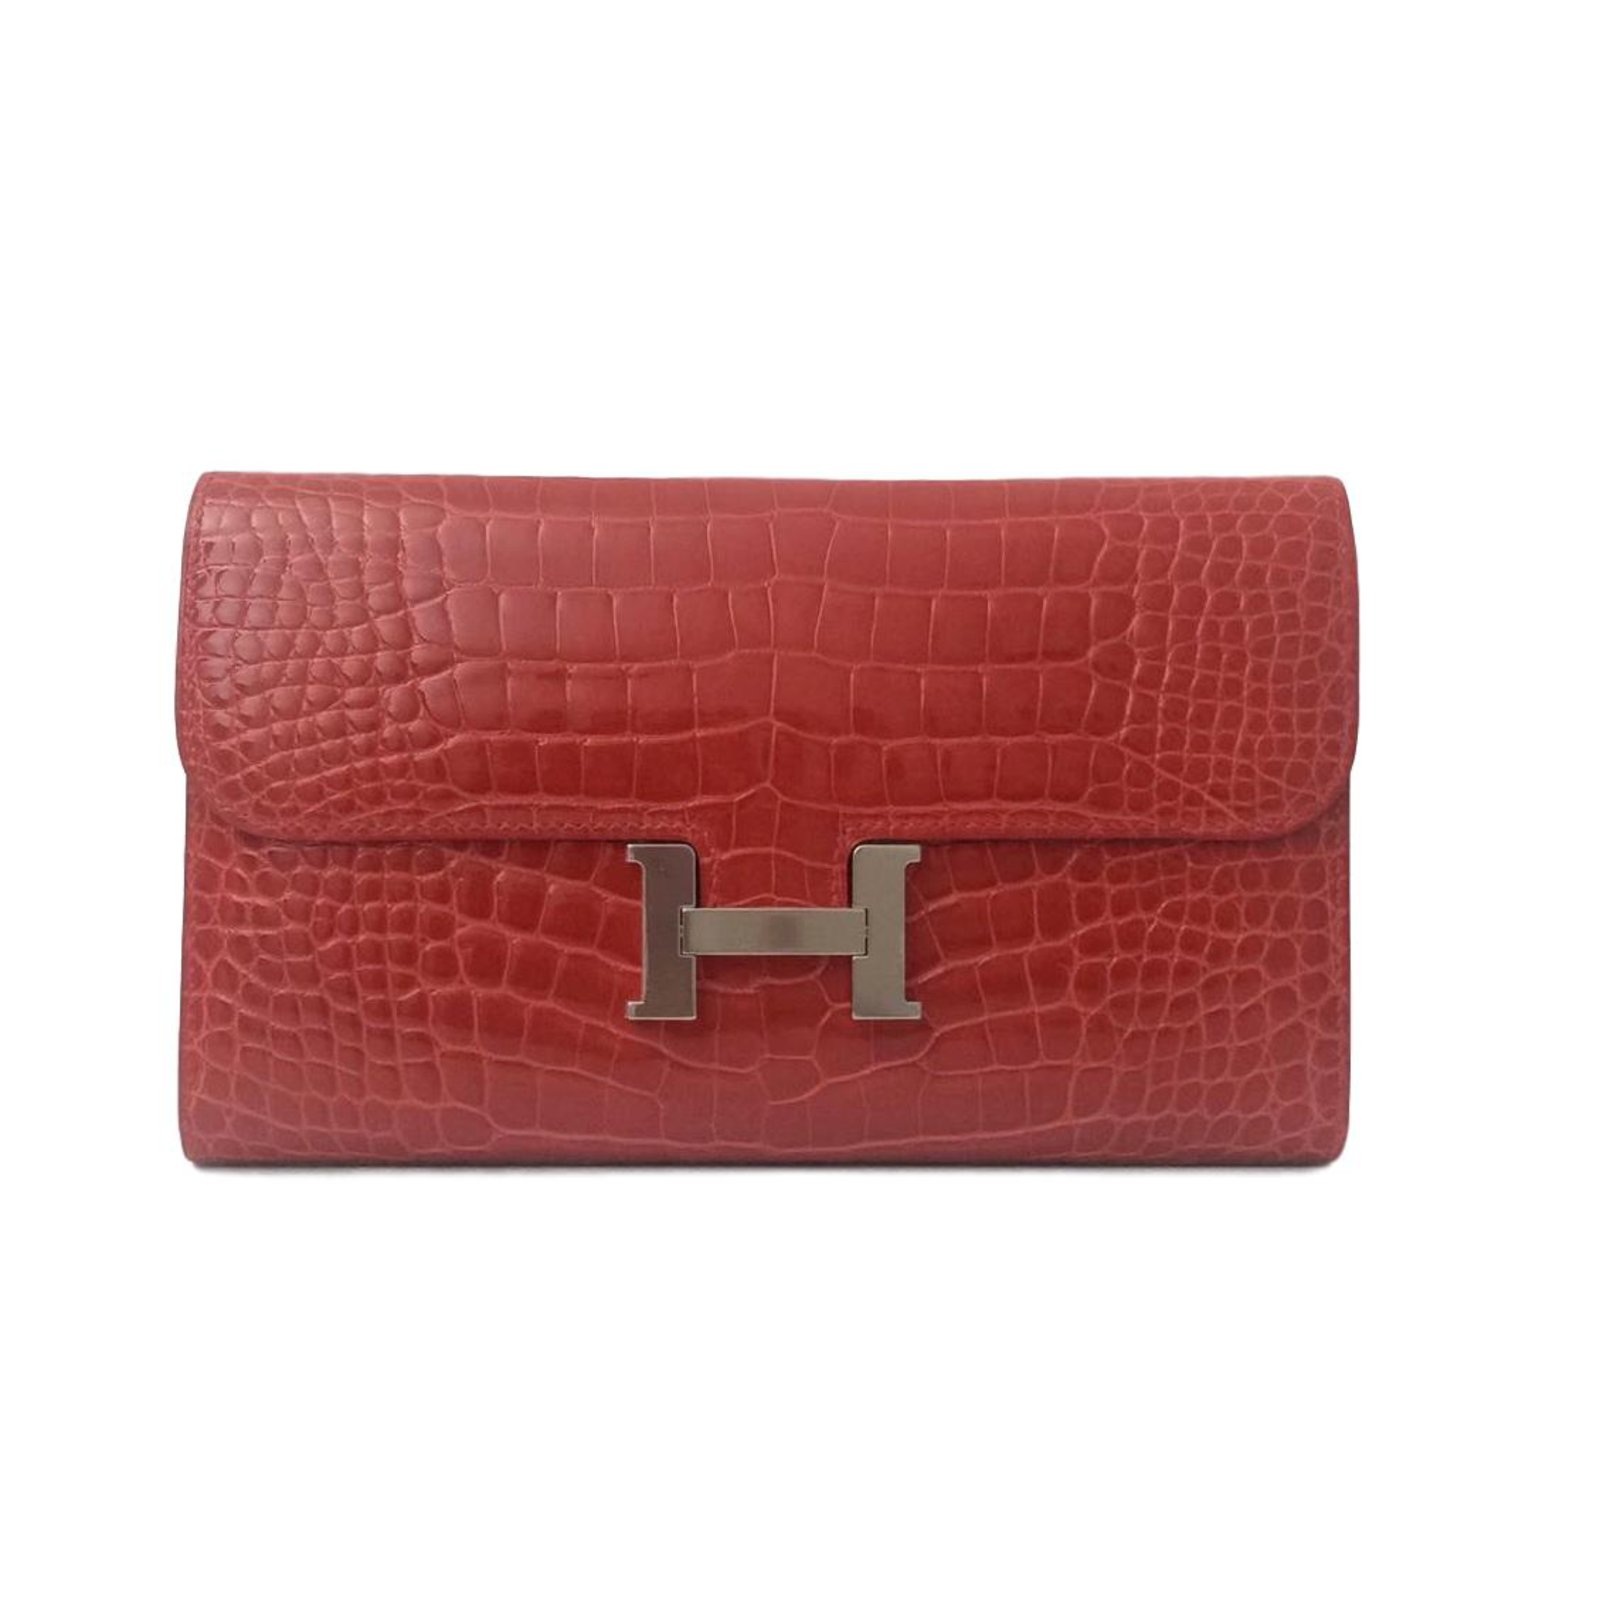 hermes red clutch